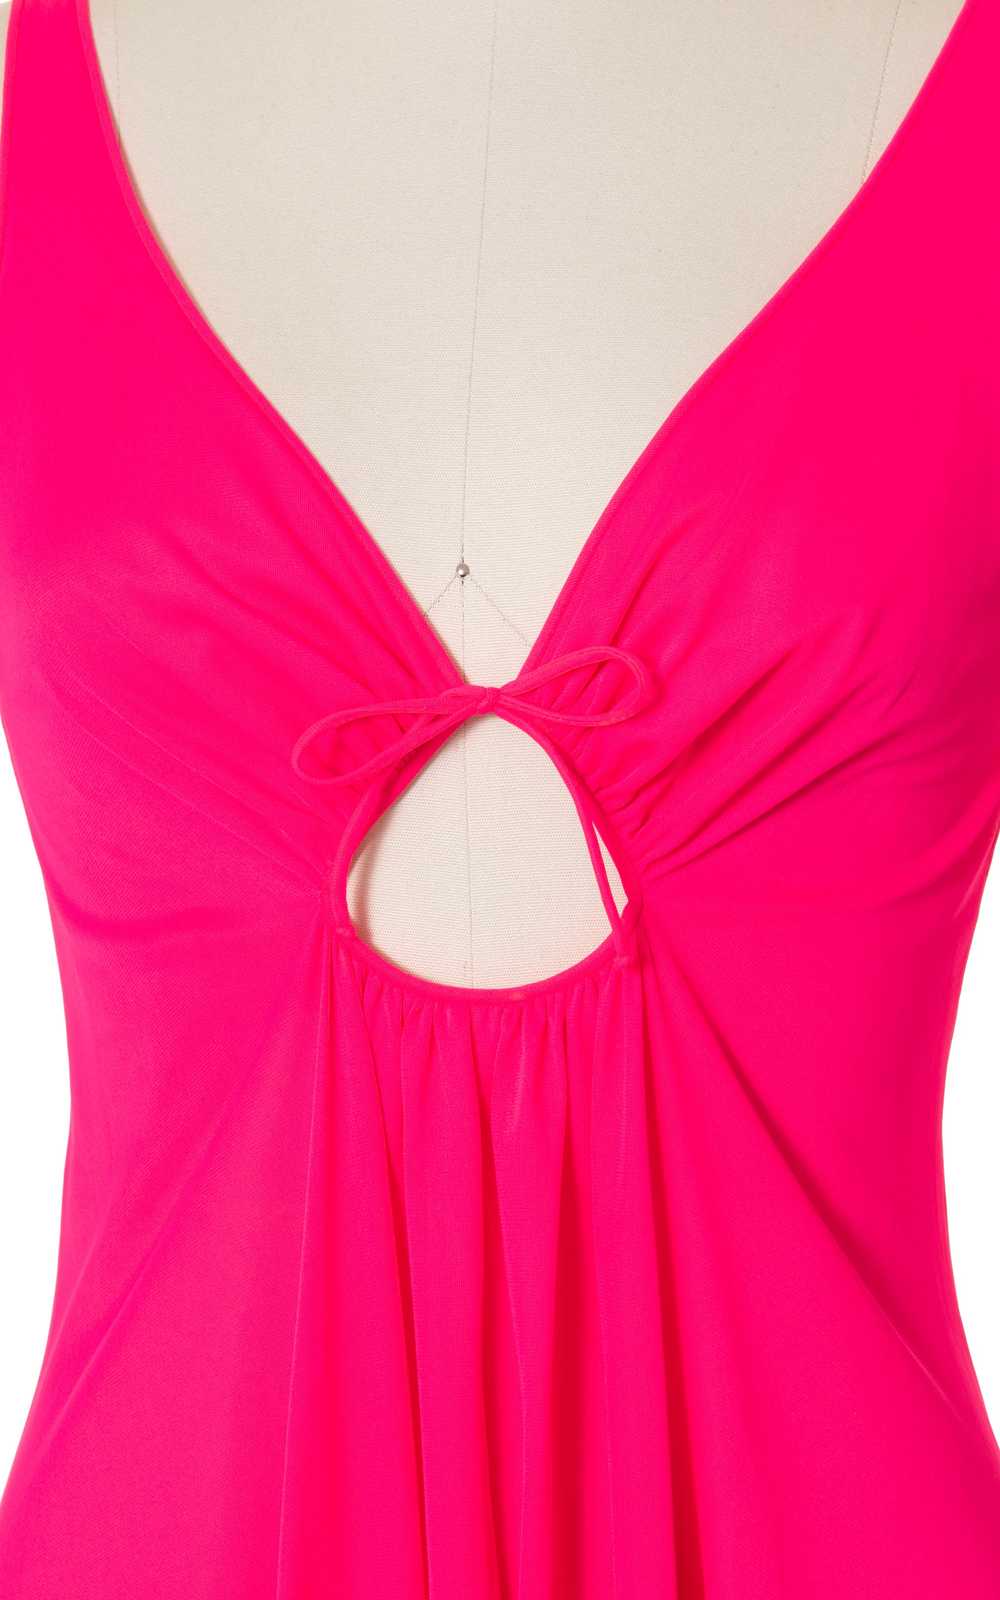 1970s Neon Hot Pink Nightgown | small/medium/large - image 8